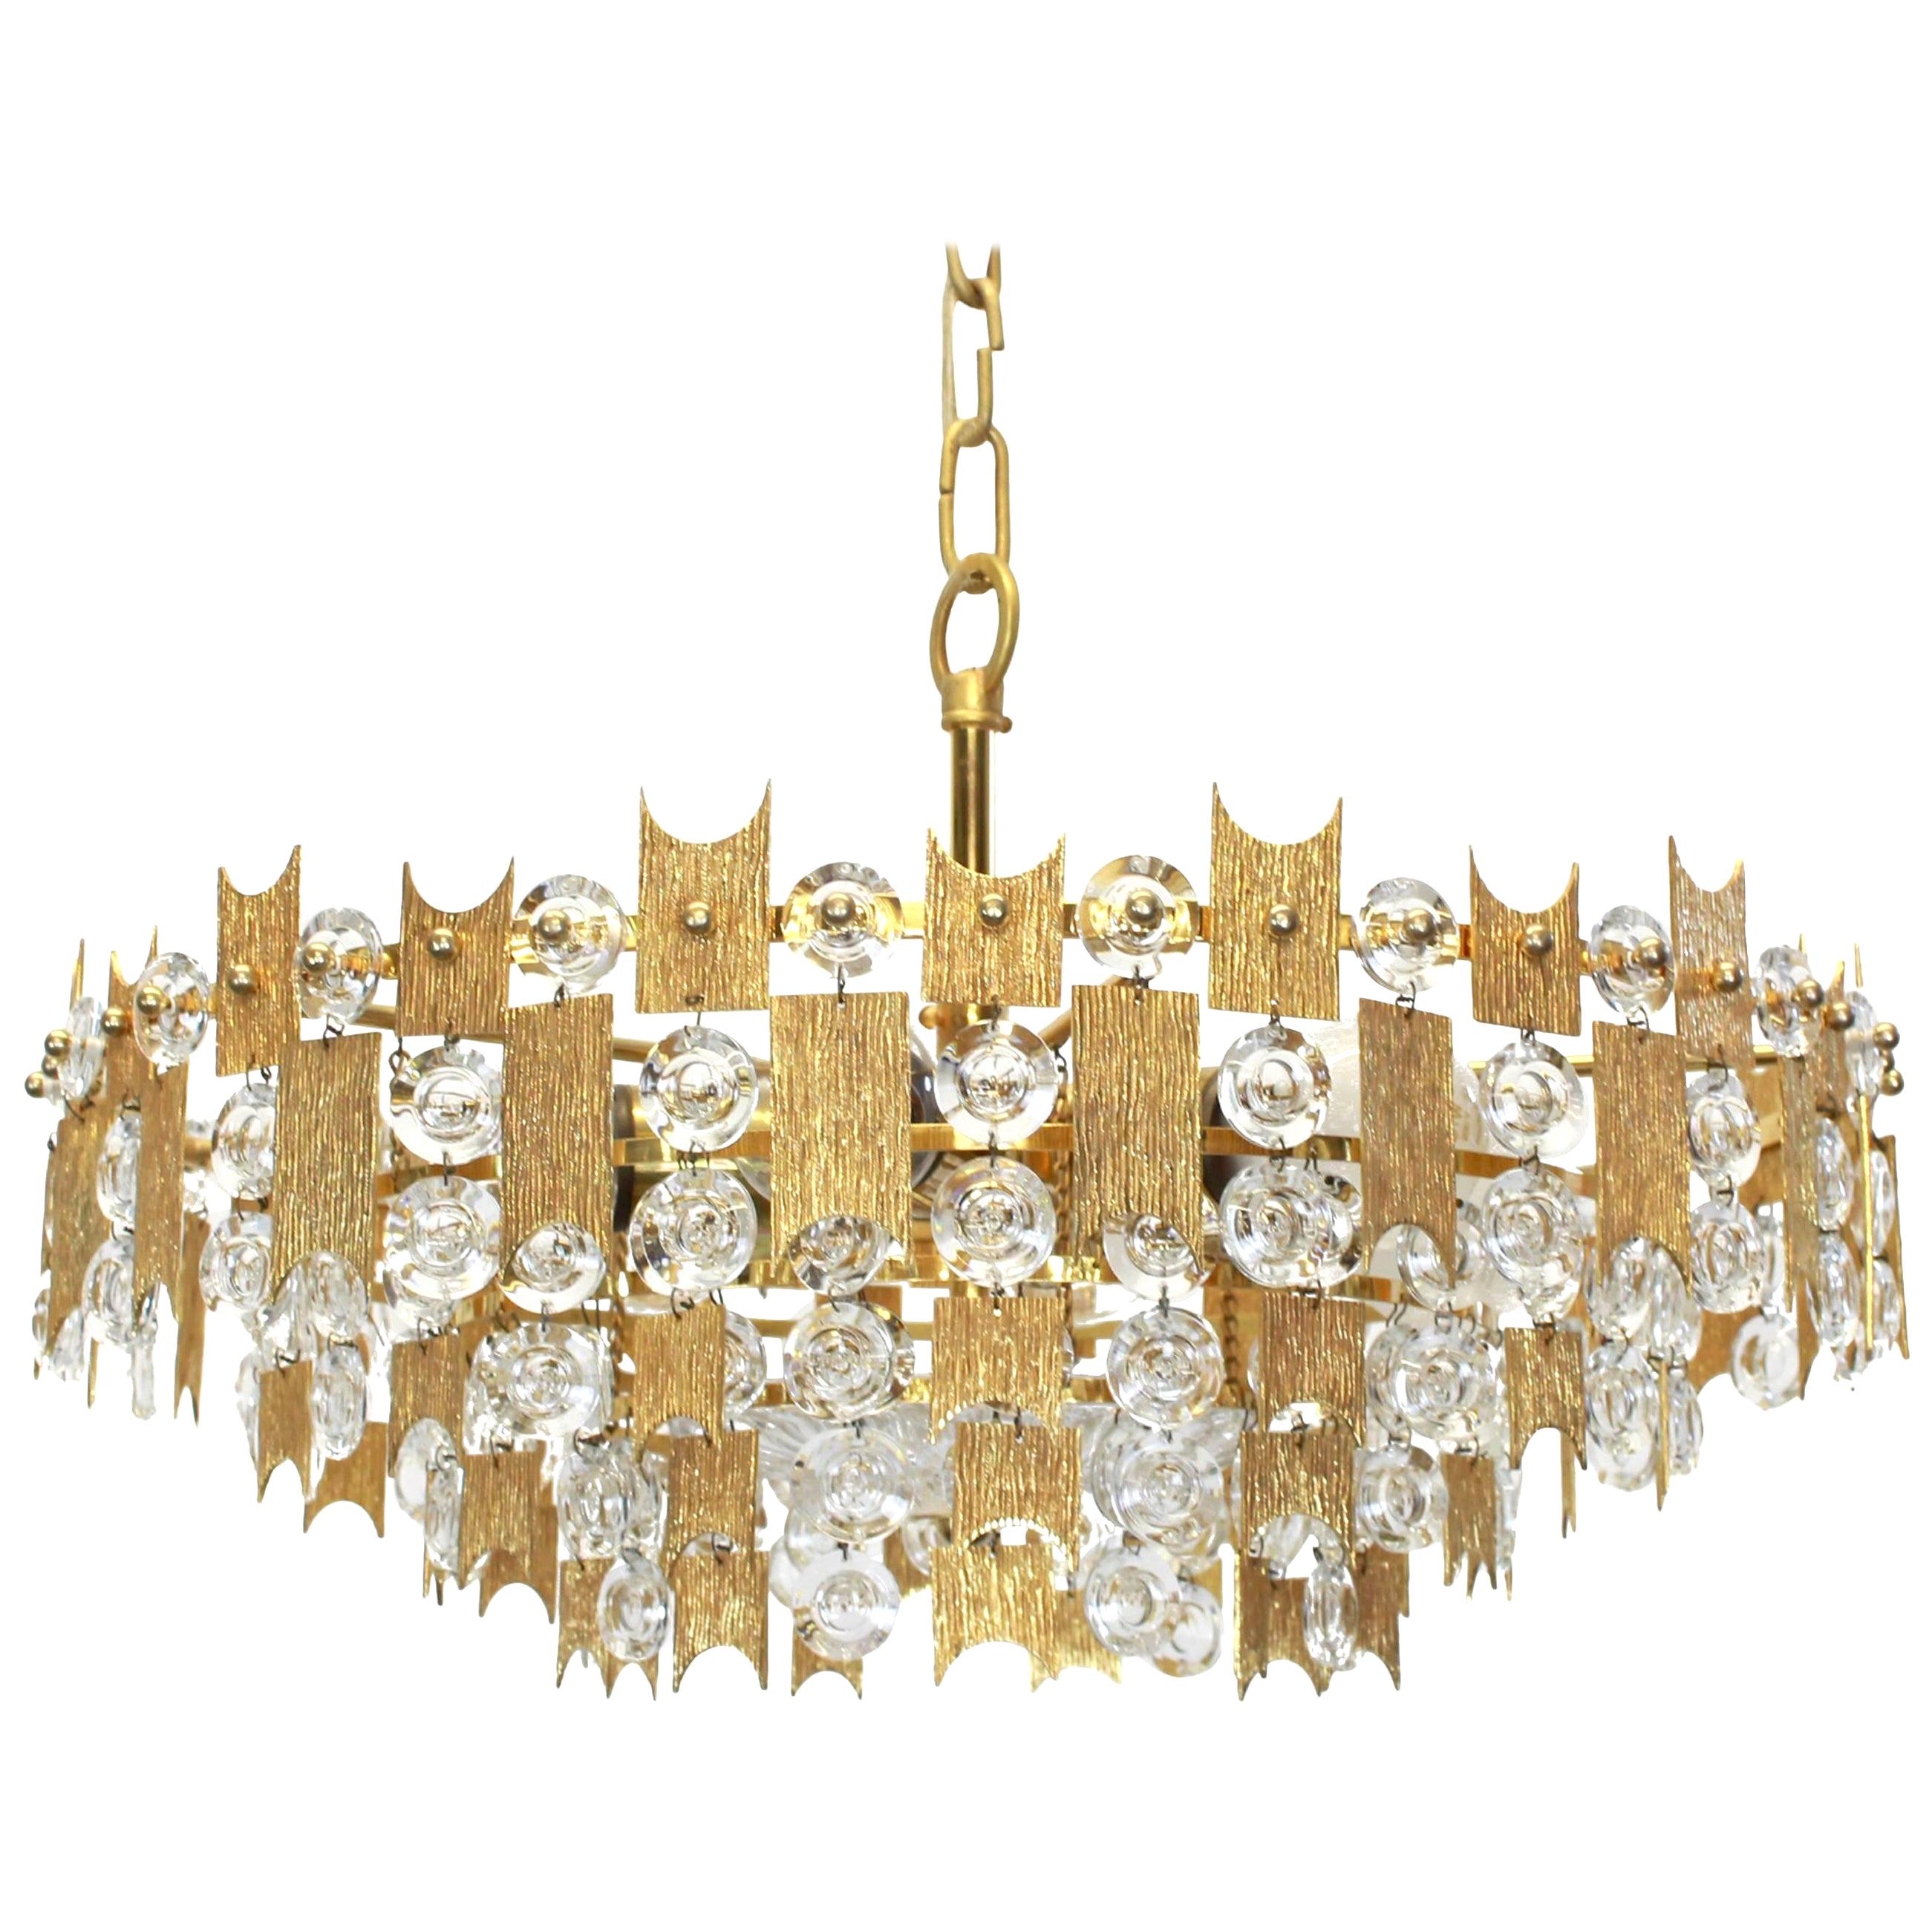 1 of 2 Impressive Large Gilt Brass and Crystal Chandelier- Palwa -Germany, 1960s